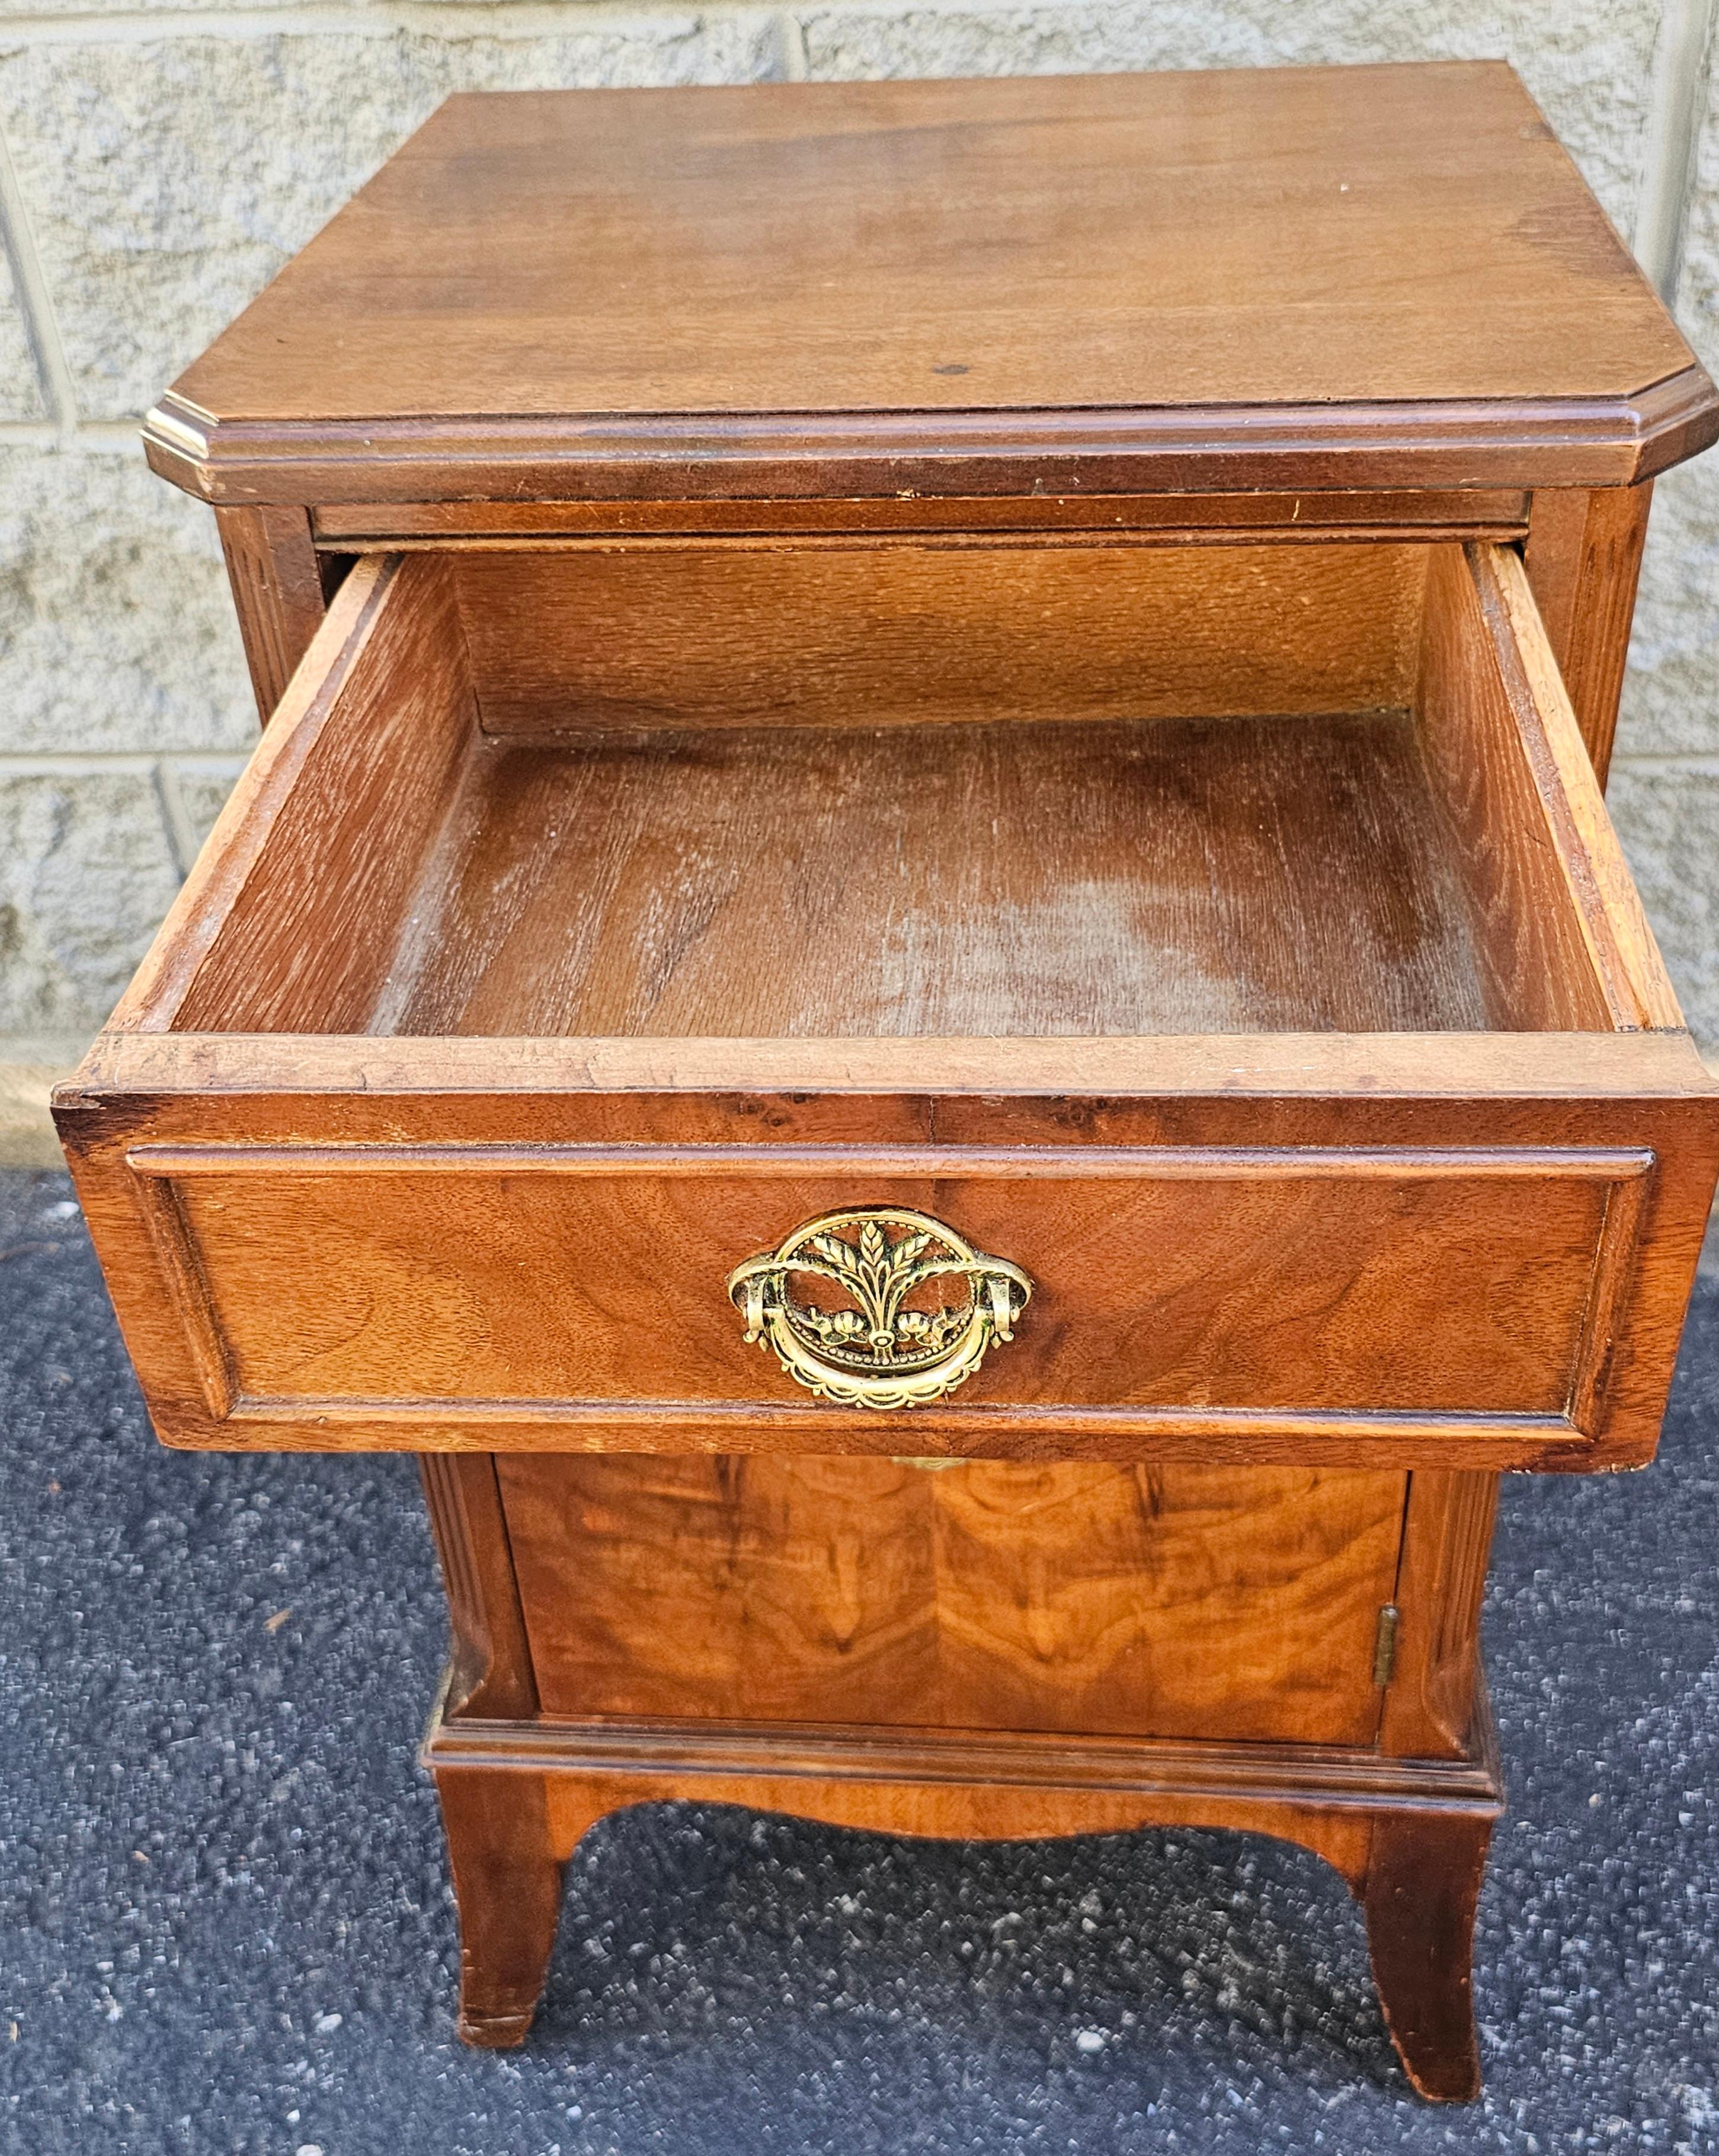 Early 20th Century Federal Style Burl Mahogany Nightstand Side Table Cabinet In Good Condition For Sale In Germantown, MD